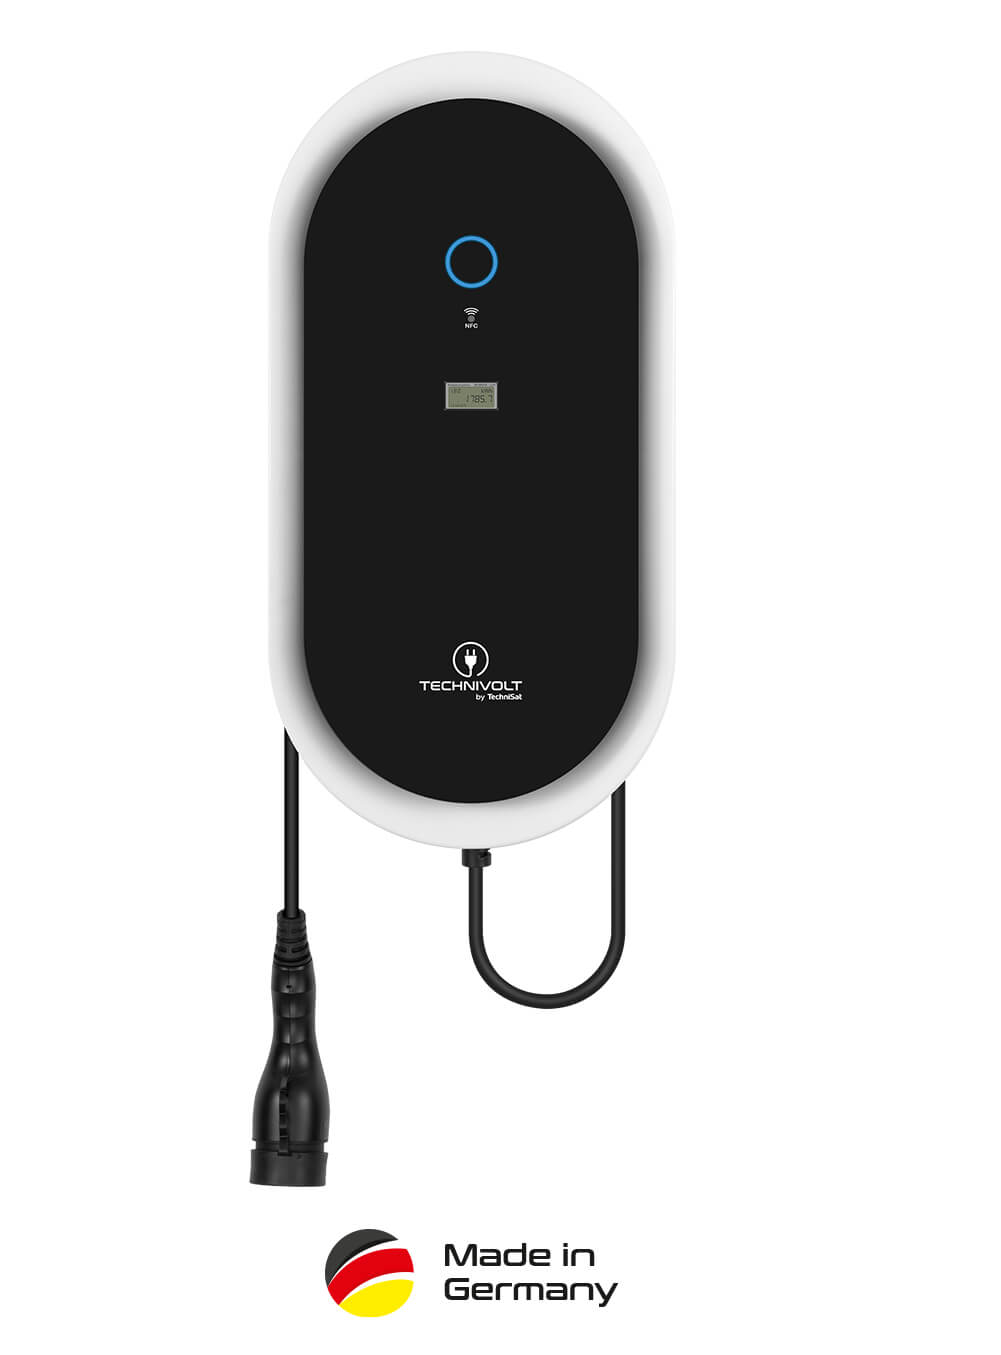 TECHNIVOLT 1100 SMART:11 kW charging station with permanently connected charging cable according to IEC 62196-2 type 2